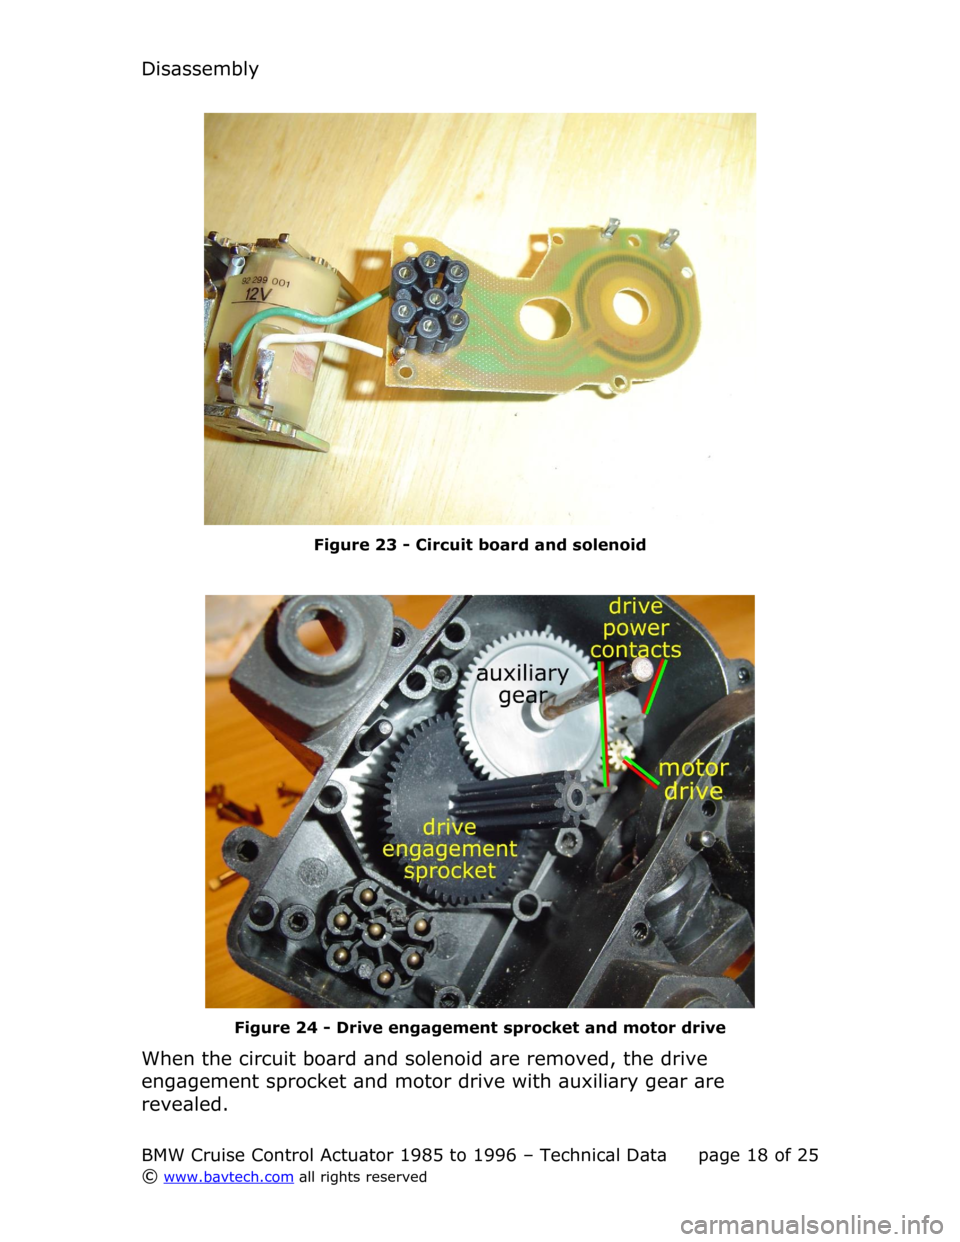 BMW 3 SERIES 1995 E36 Cruise Control Acutator Disassembly
Figure  23  - Circuit board and solenoid
Figure  24  - Drive engagement sprocket and motor drive
When the circuit board and solenoid are removed, the drive  
engagement sprocket and motor 